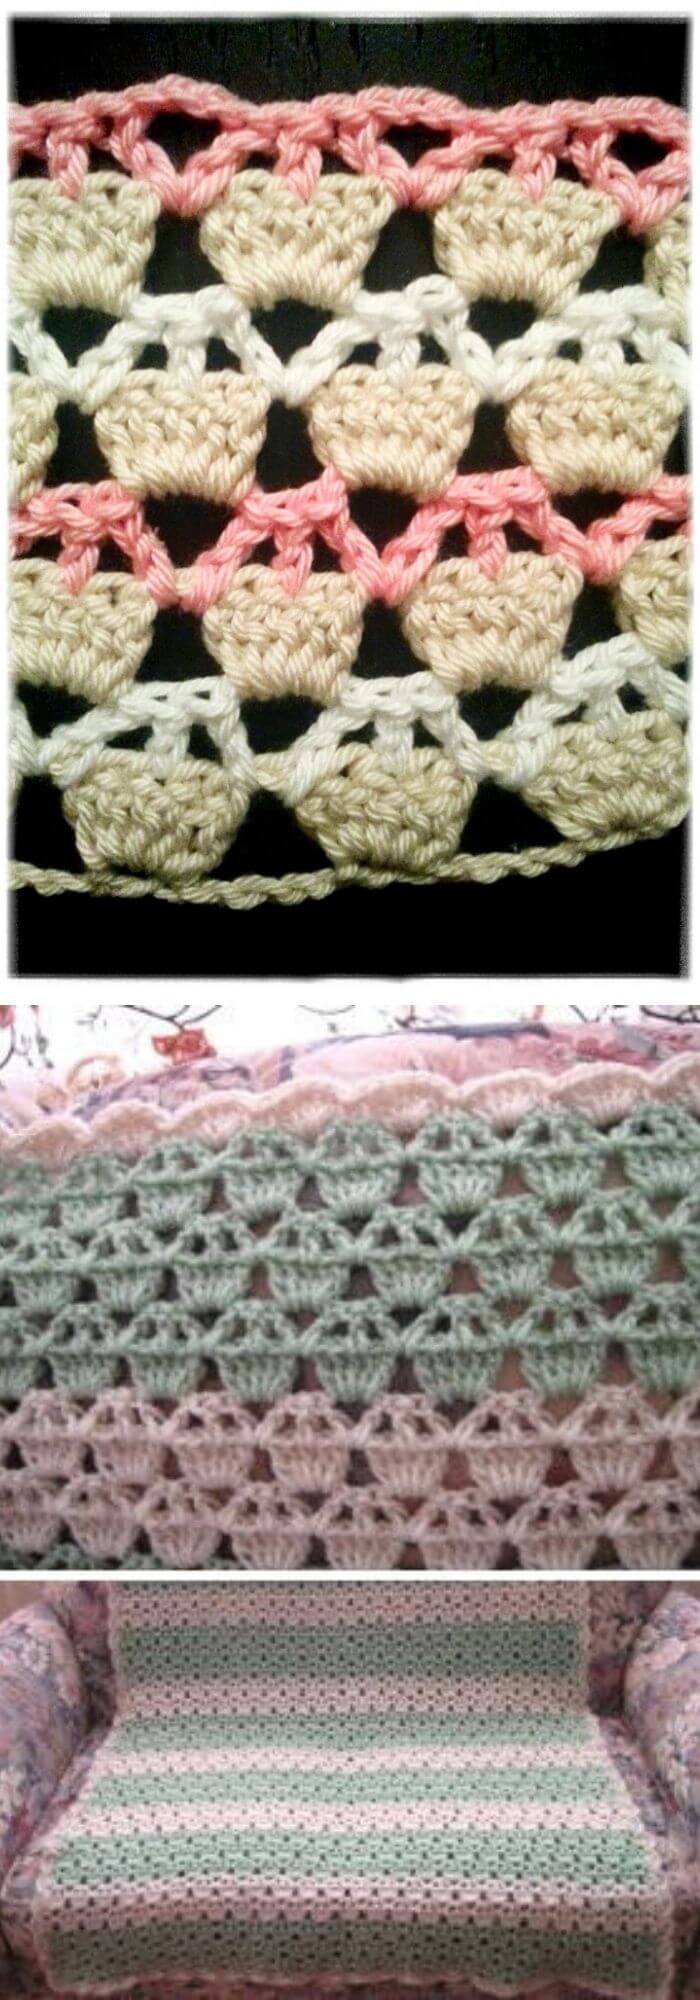 Download 20+ Best DIY Crochet Cupcake Stitch Free Patterns (With Instructions)